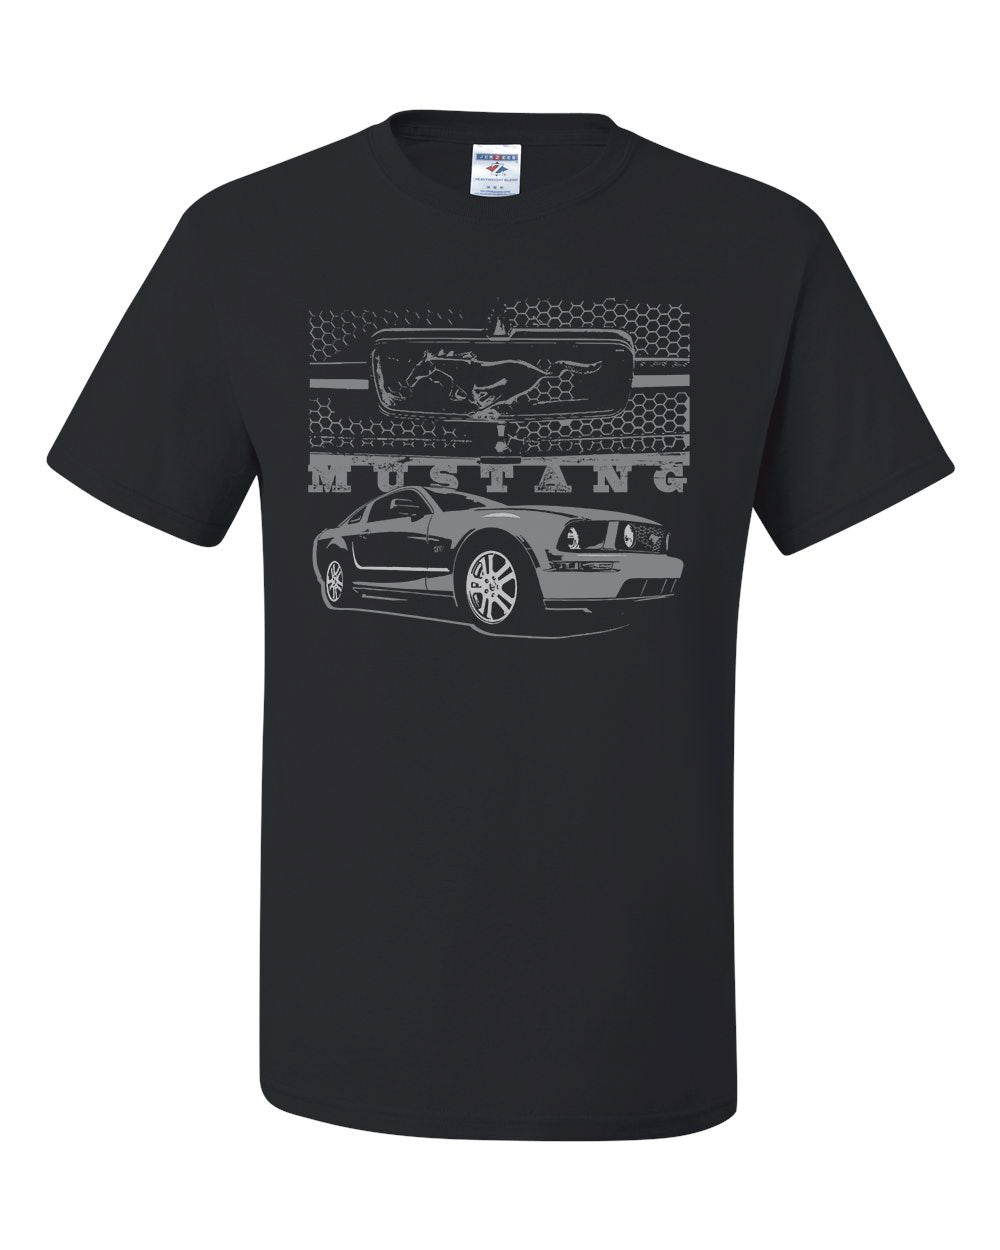 FORD HONEYCOMB GRILLE T-Shirt Mustang Silhouette US Muscle Car Tee ...